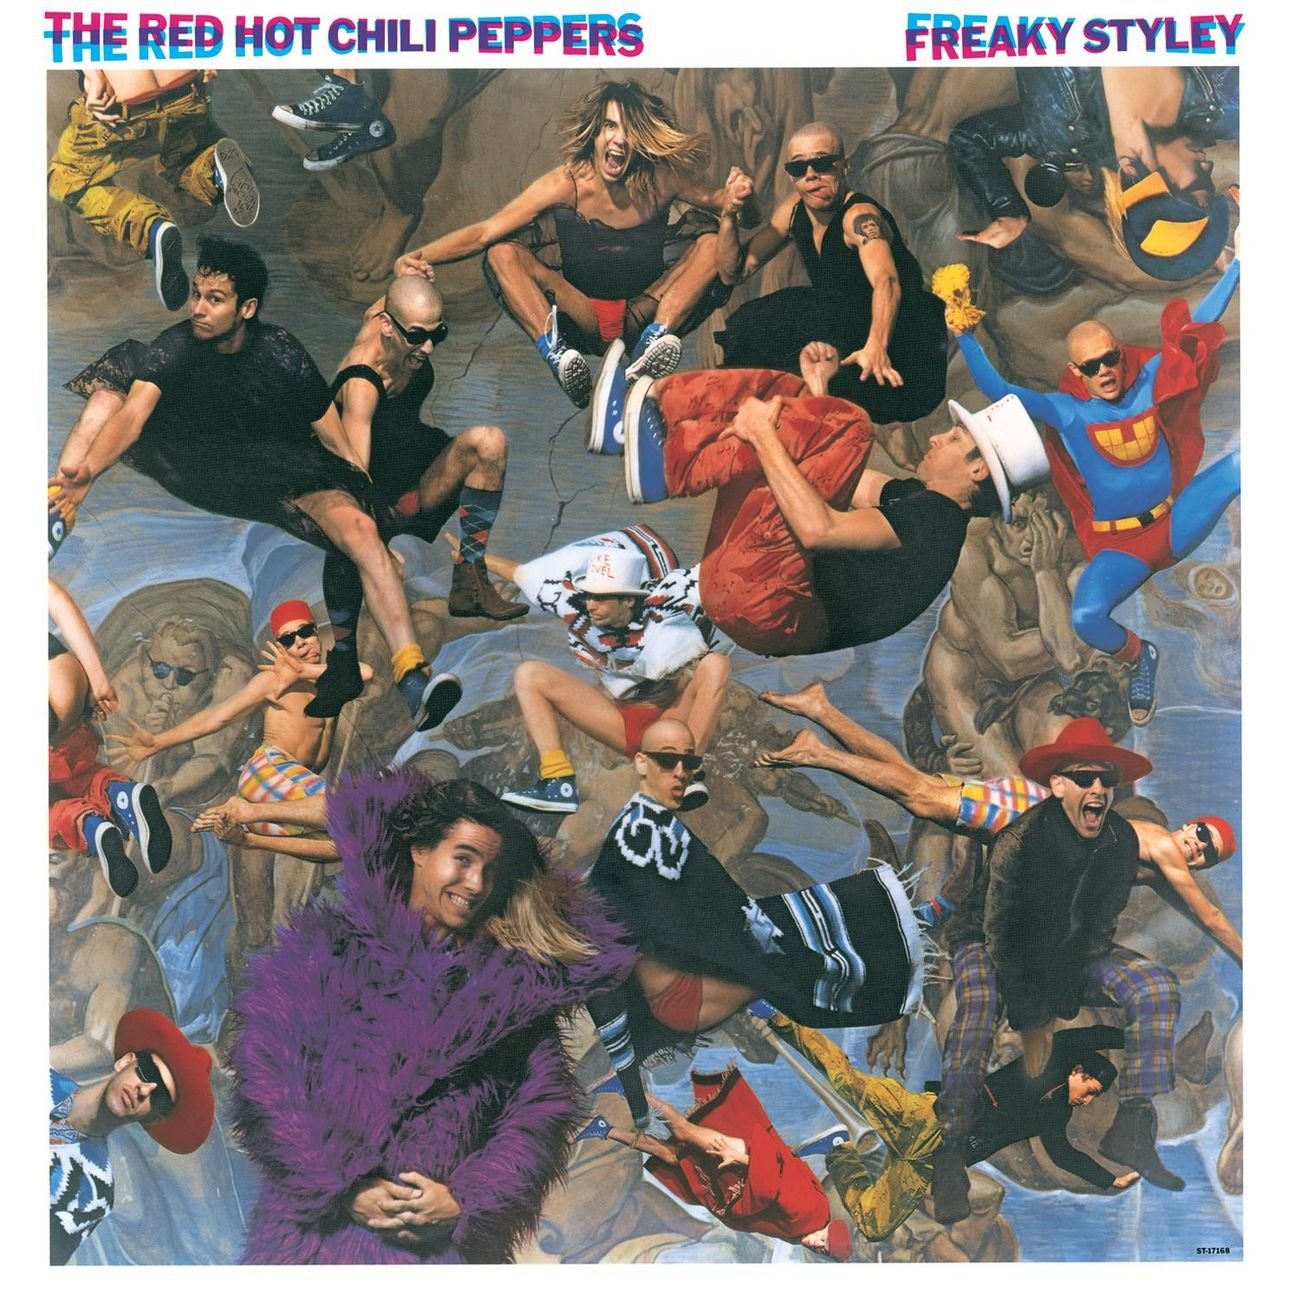 Cover of the LP Freaky Styley by Red Hot Chili Peppers